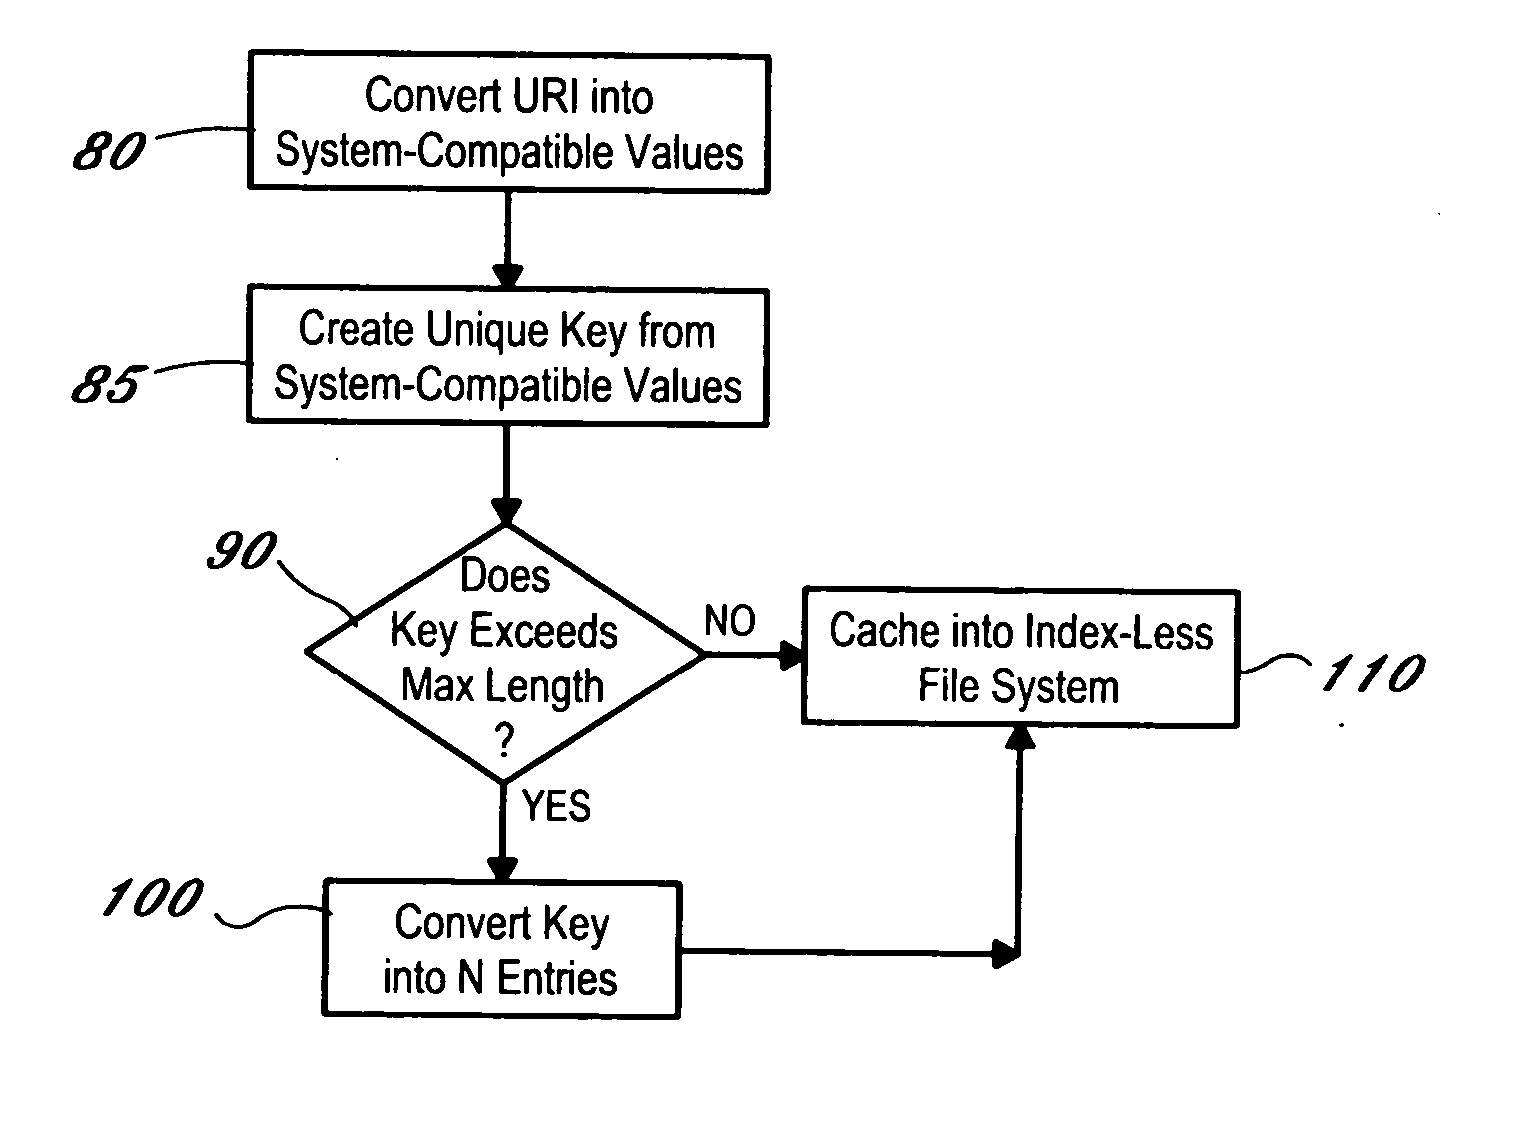 System and method for generating a unique, file system independent key from a URI (Universal Resource Identifier) for use in an index-less VoiceXML browser caching mechanism